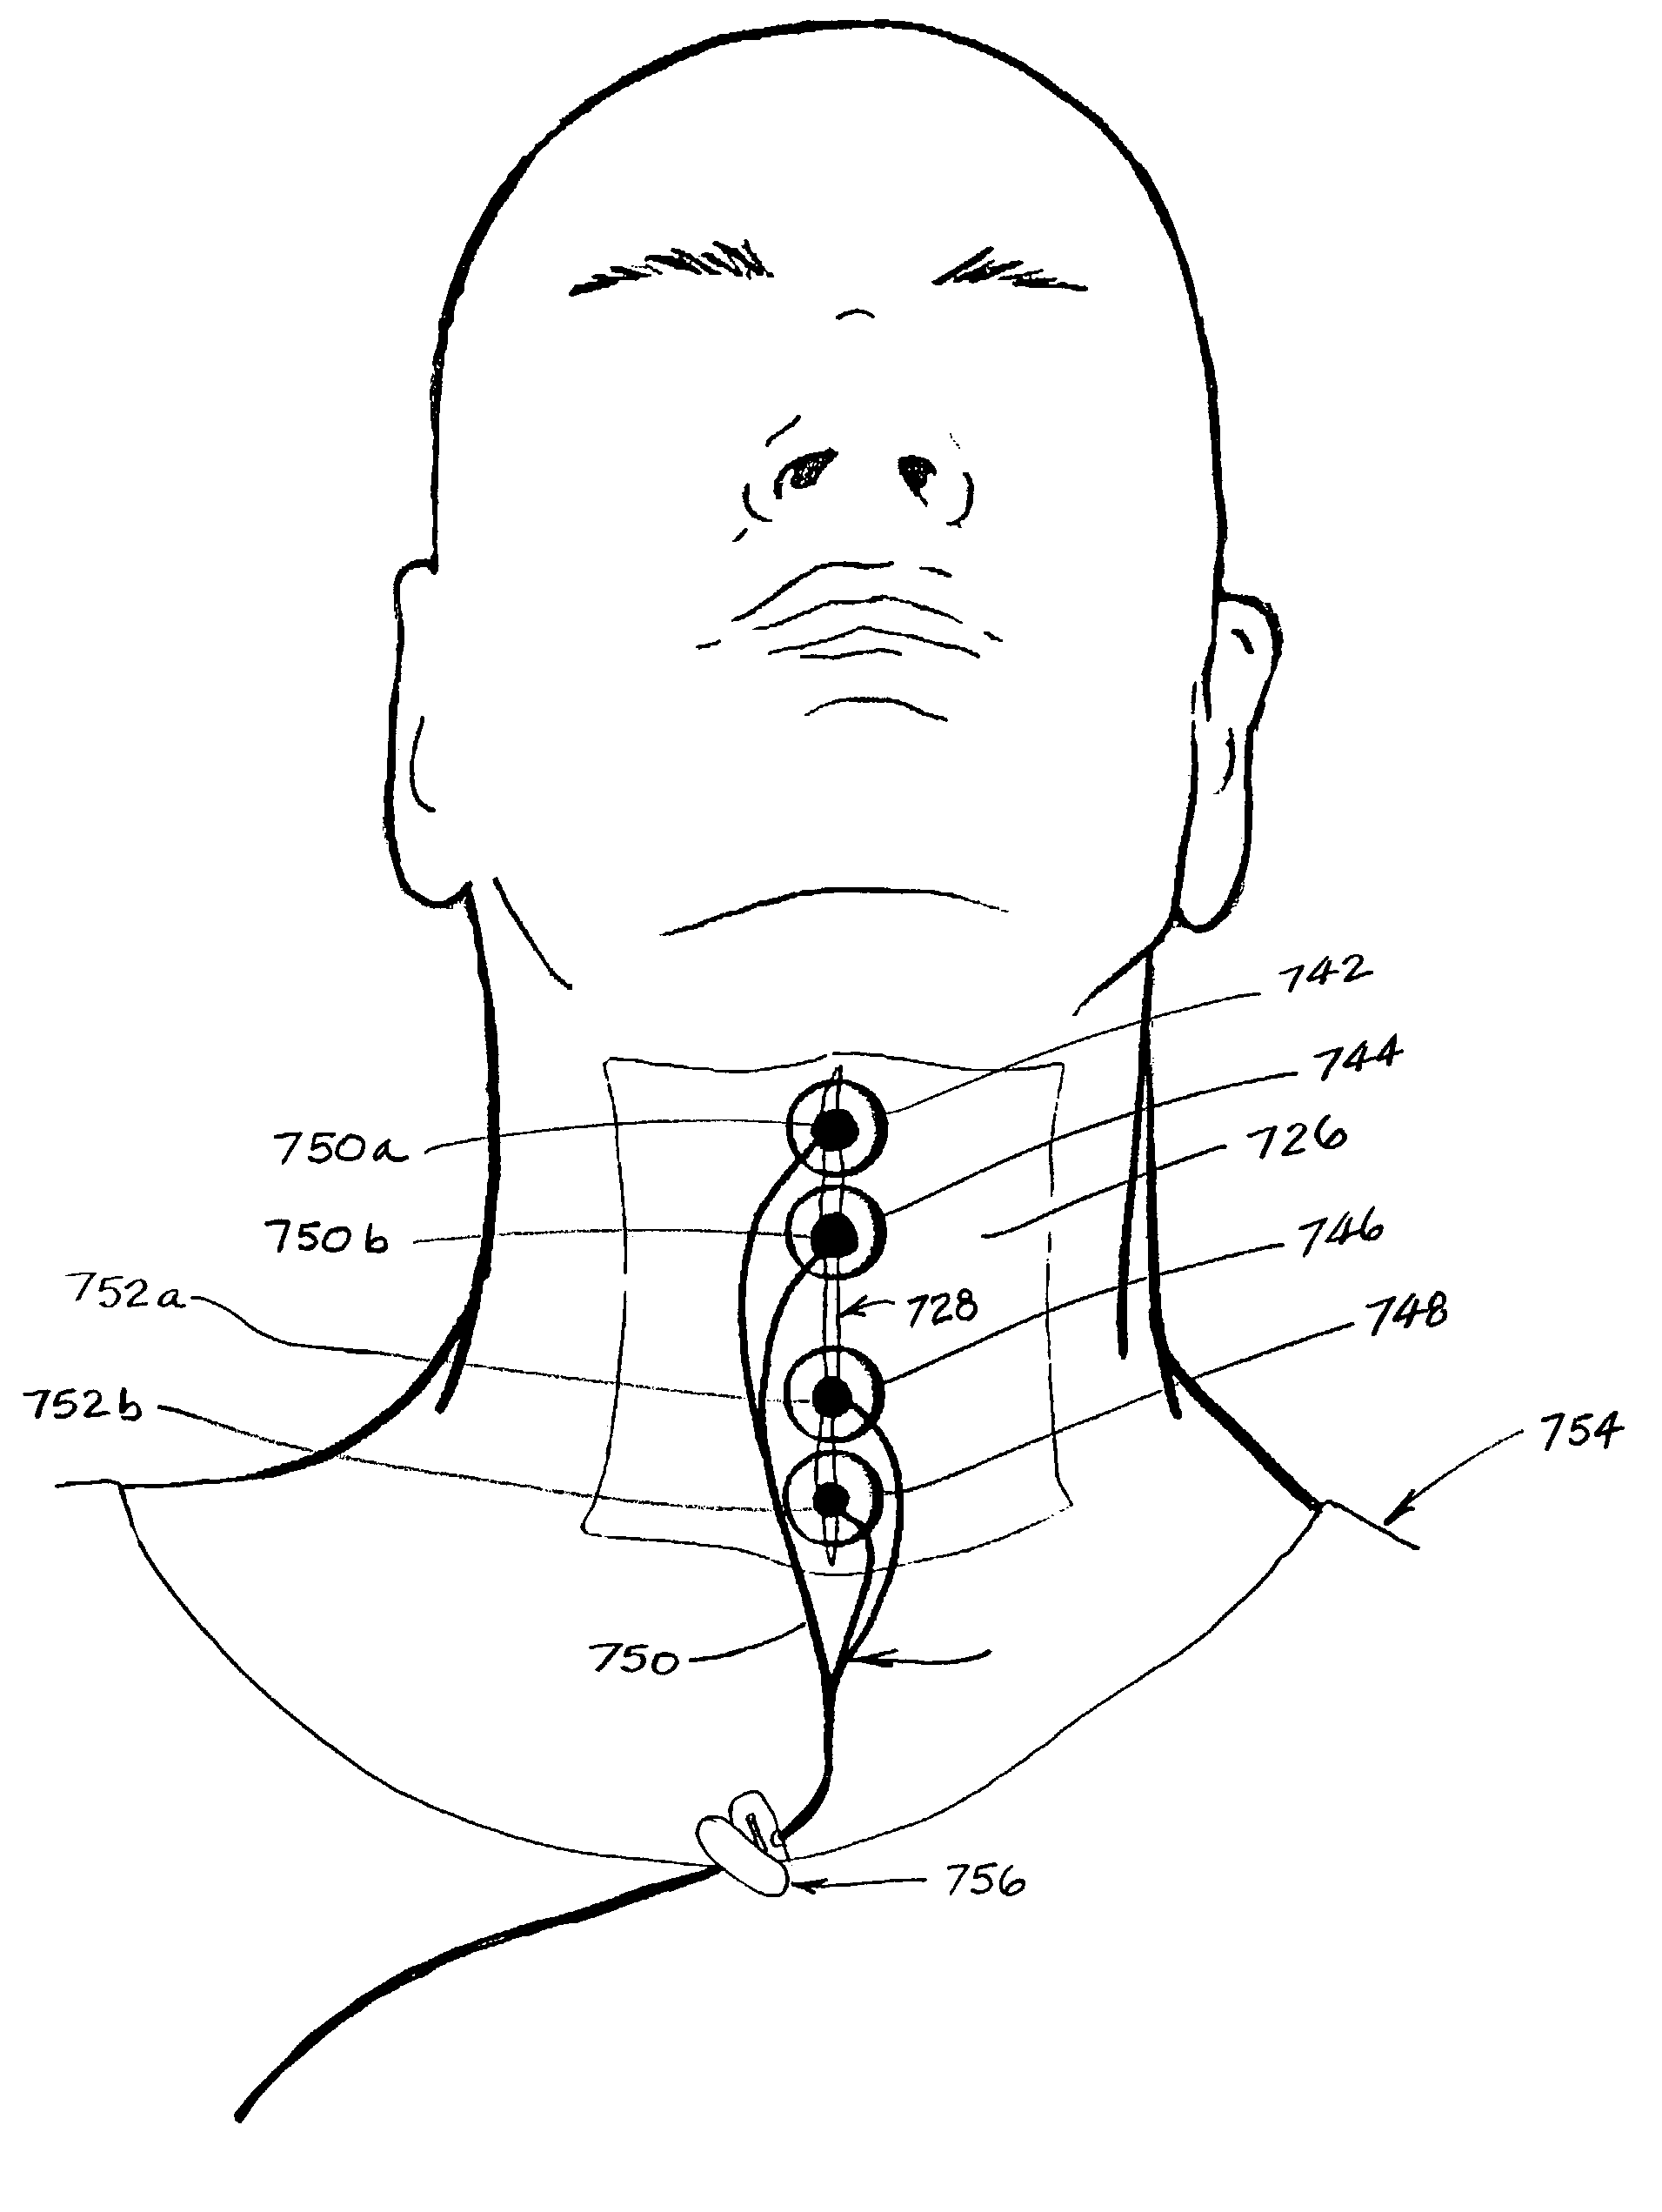 Method and apparatus for treating oropharyngeal disorders with electrical stimulation